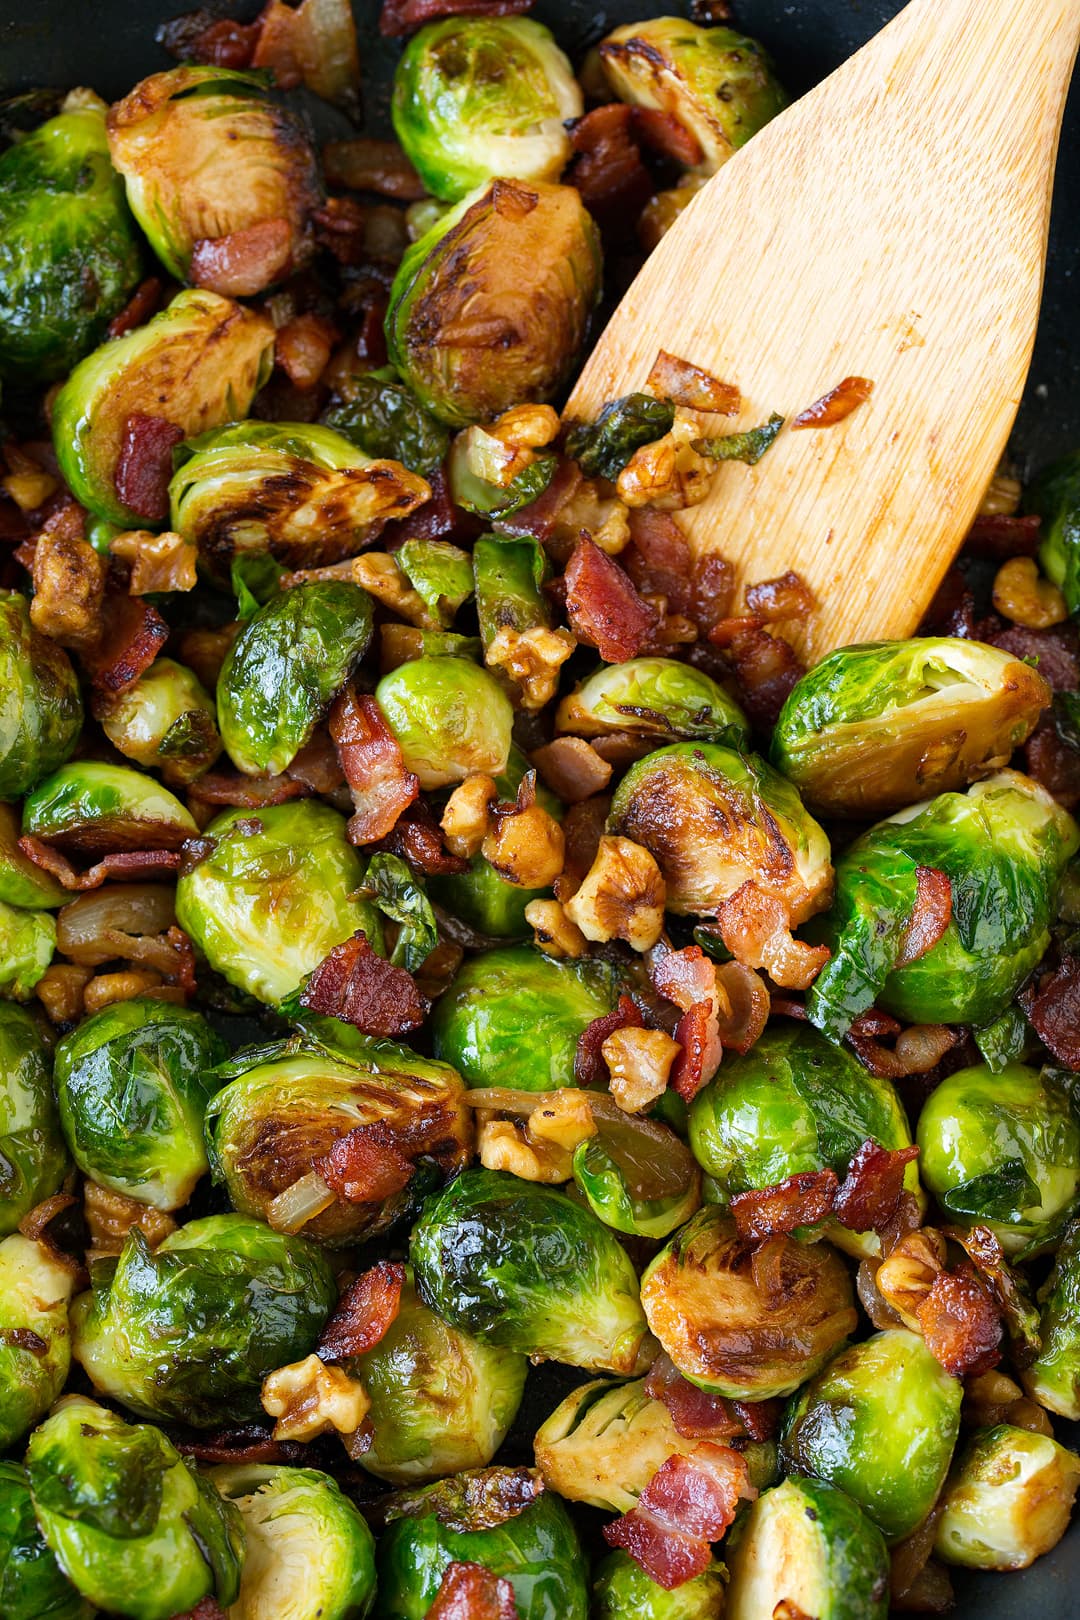 Sauteed Brussels Sprouts with Bacon Onions and Walnuts